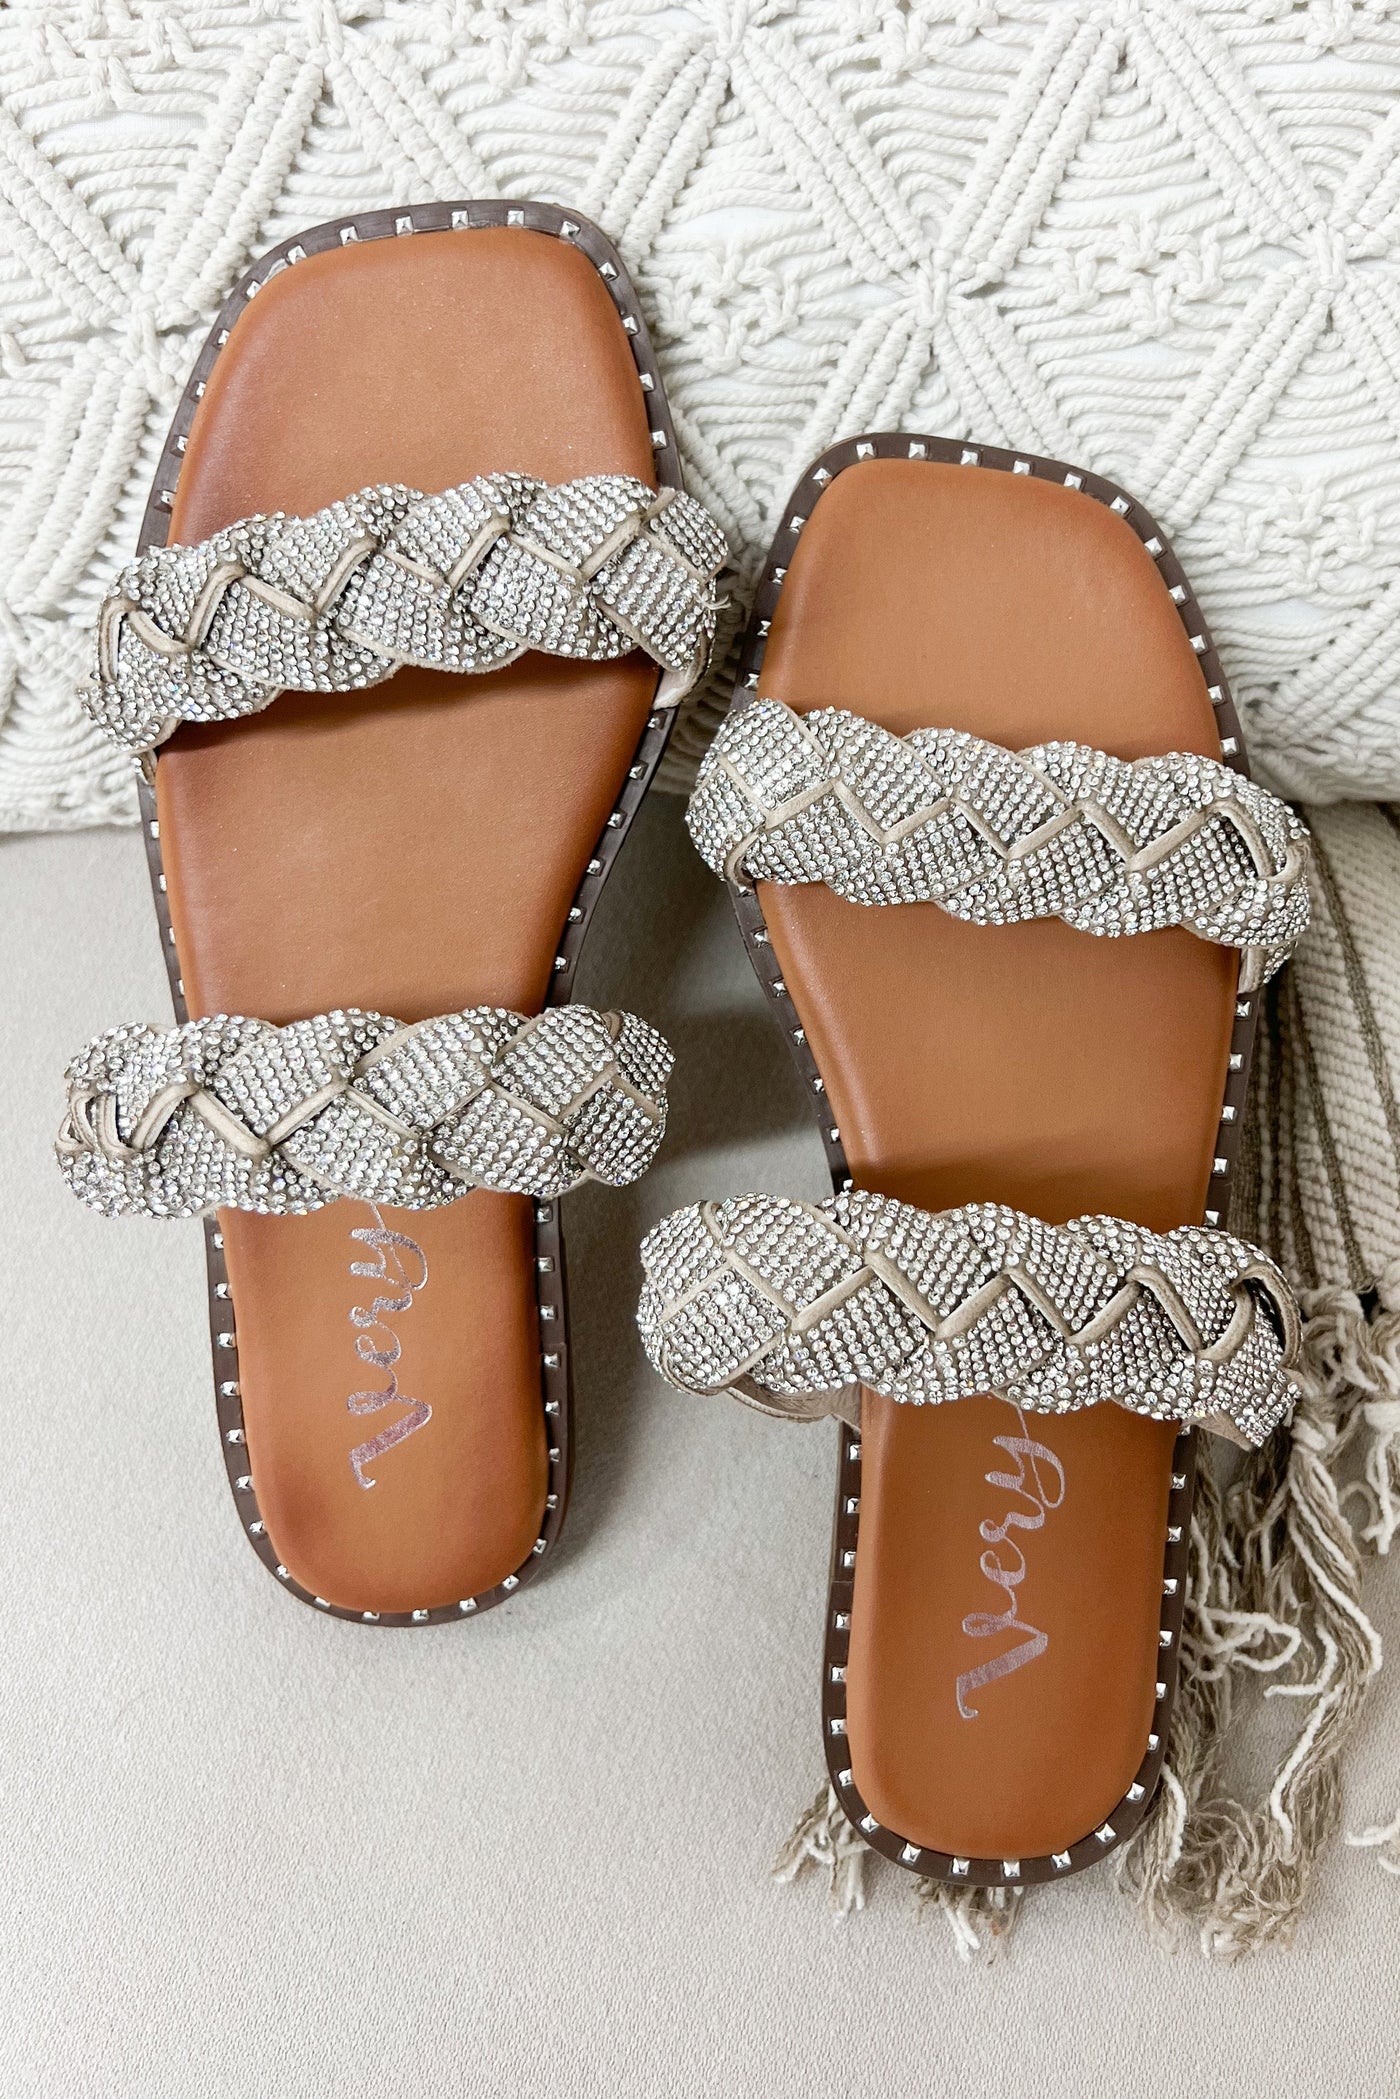 Very G Twisty Sandals (Silver) - Happily Ever Aften